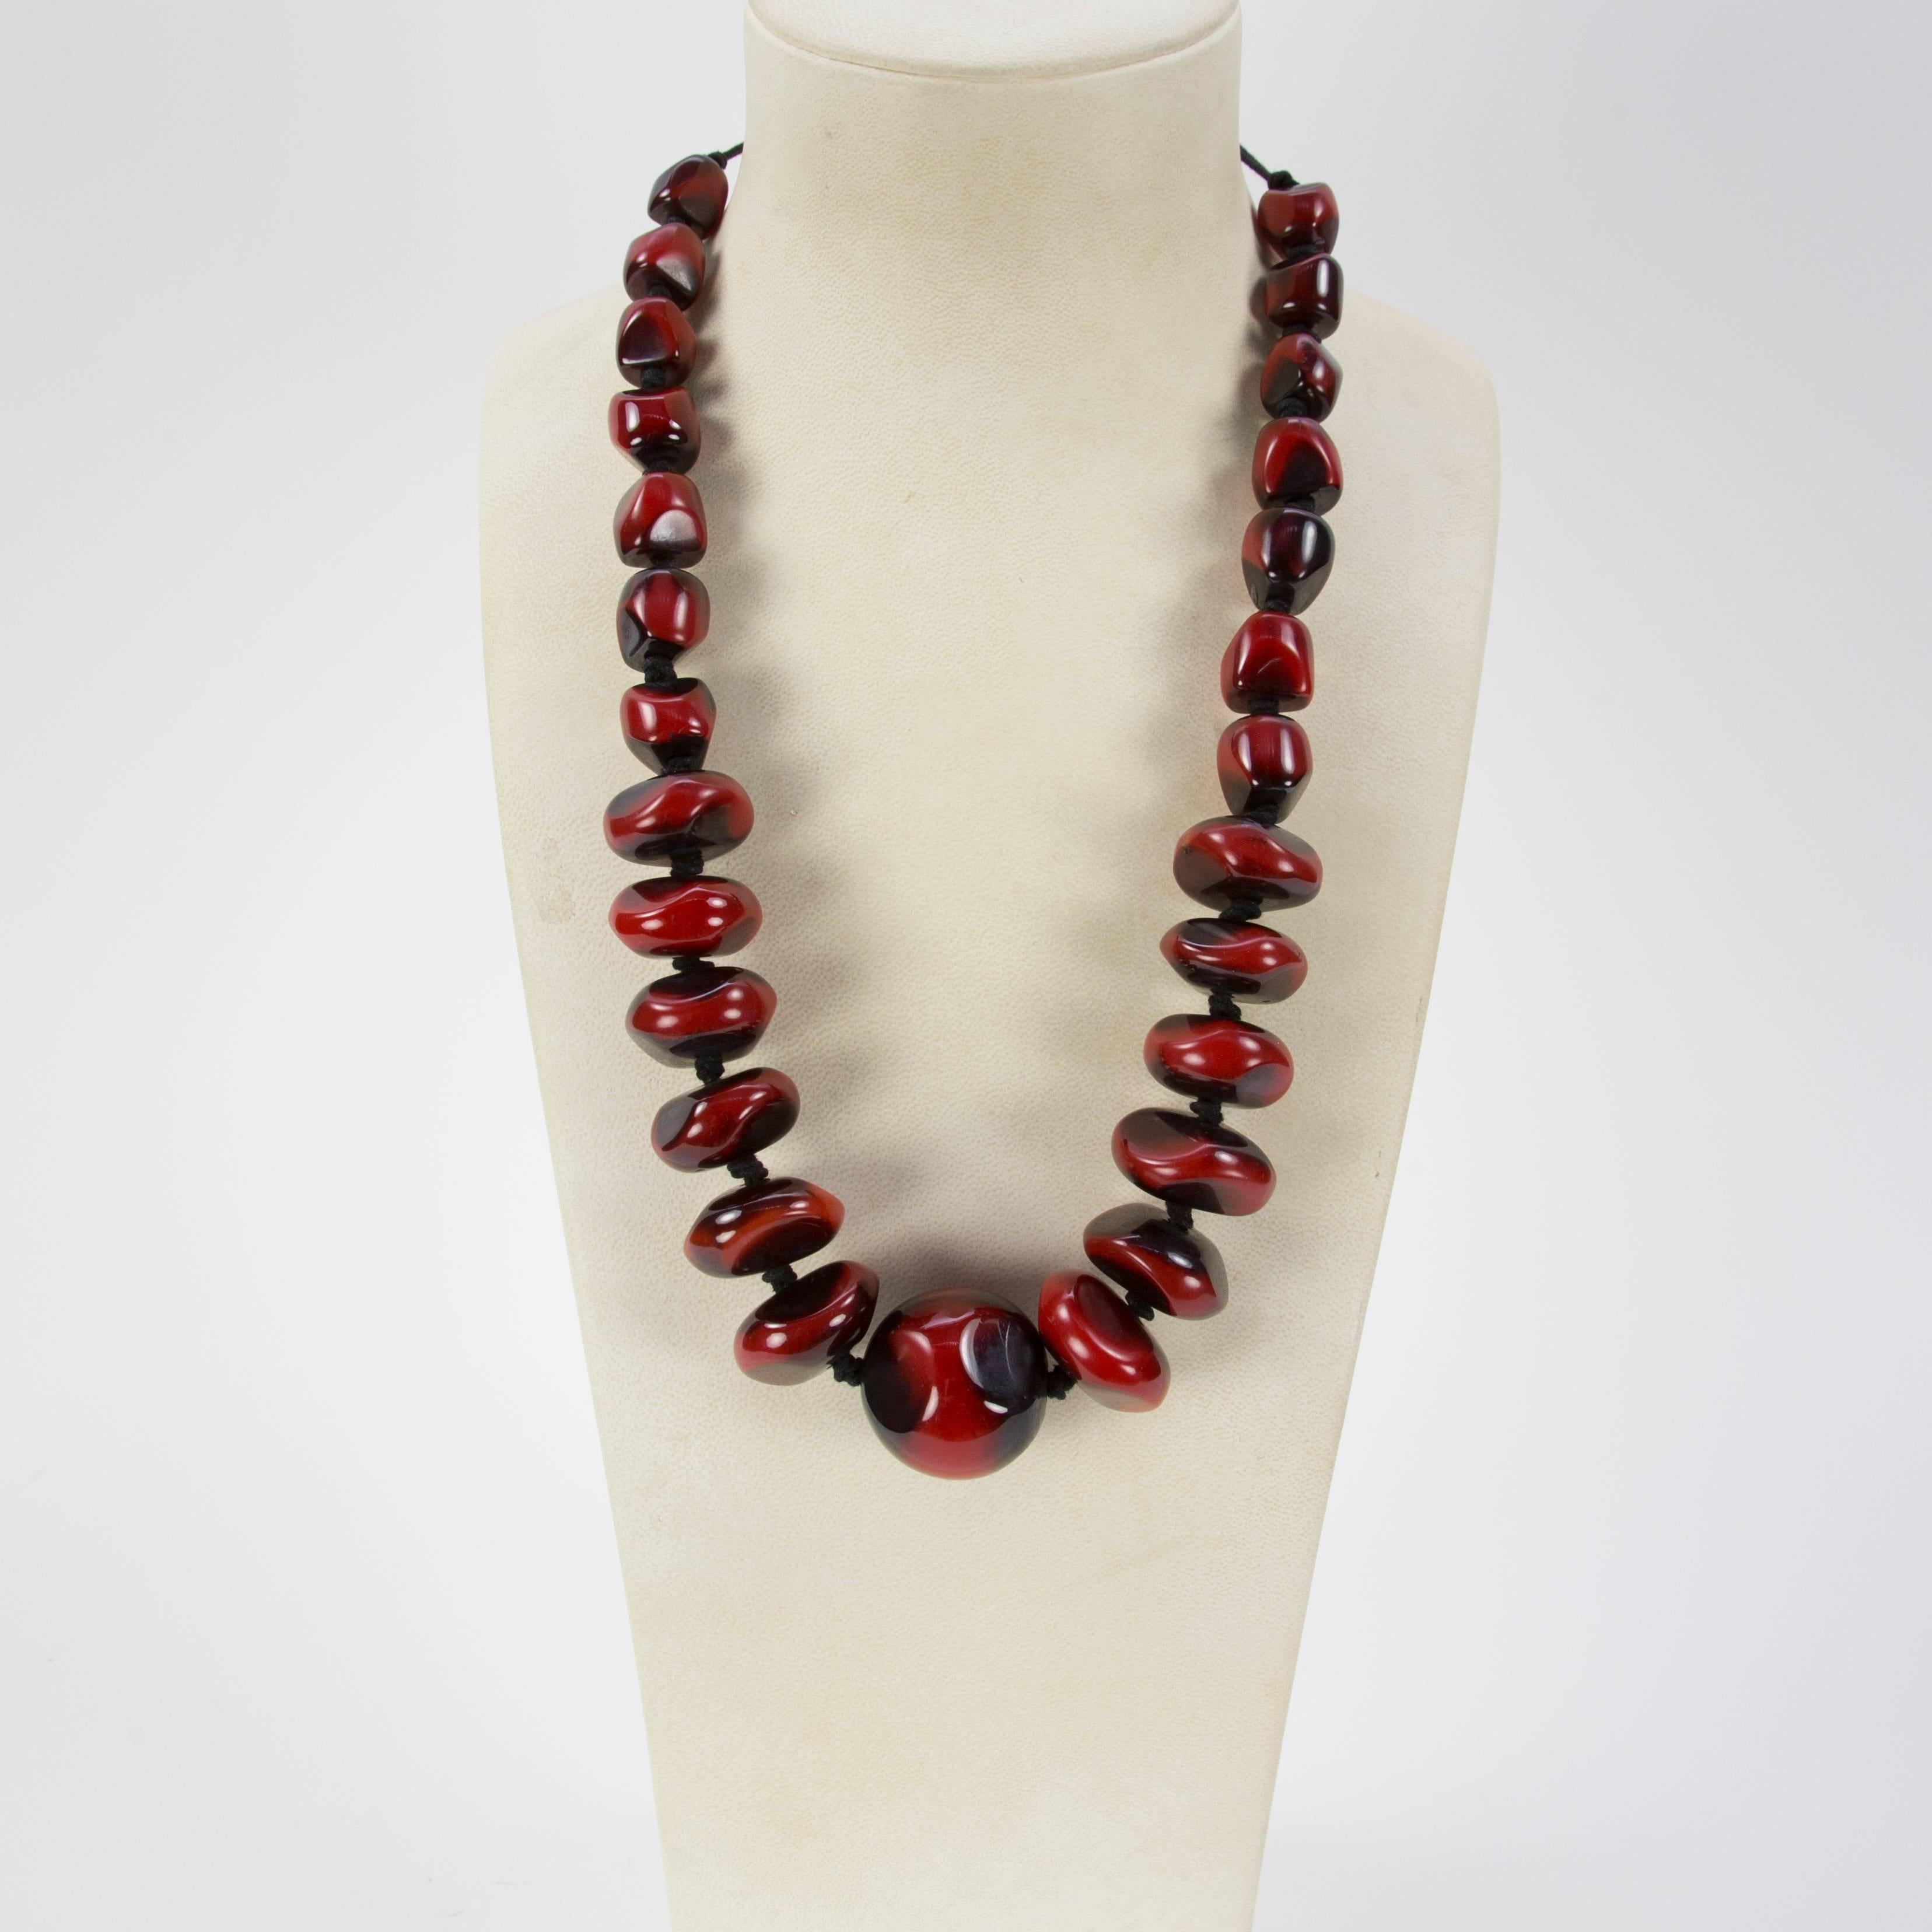 This Impressive necklace features an extraordinary graduated strand of large uniquely shaped Faux Coral resin beads; Beautiful luster! approx.  28” long; Add your own Chic and Dynamic Style to any outfit! 
